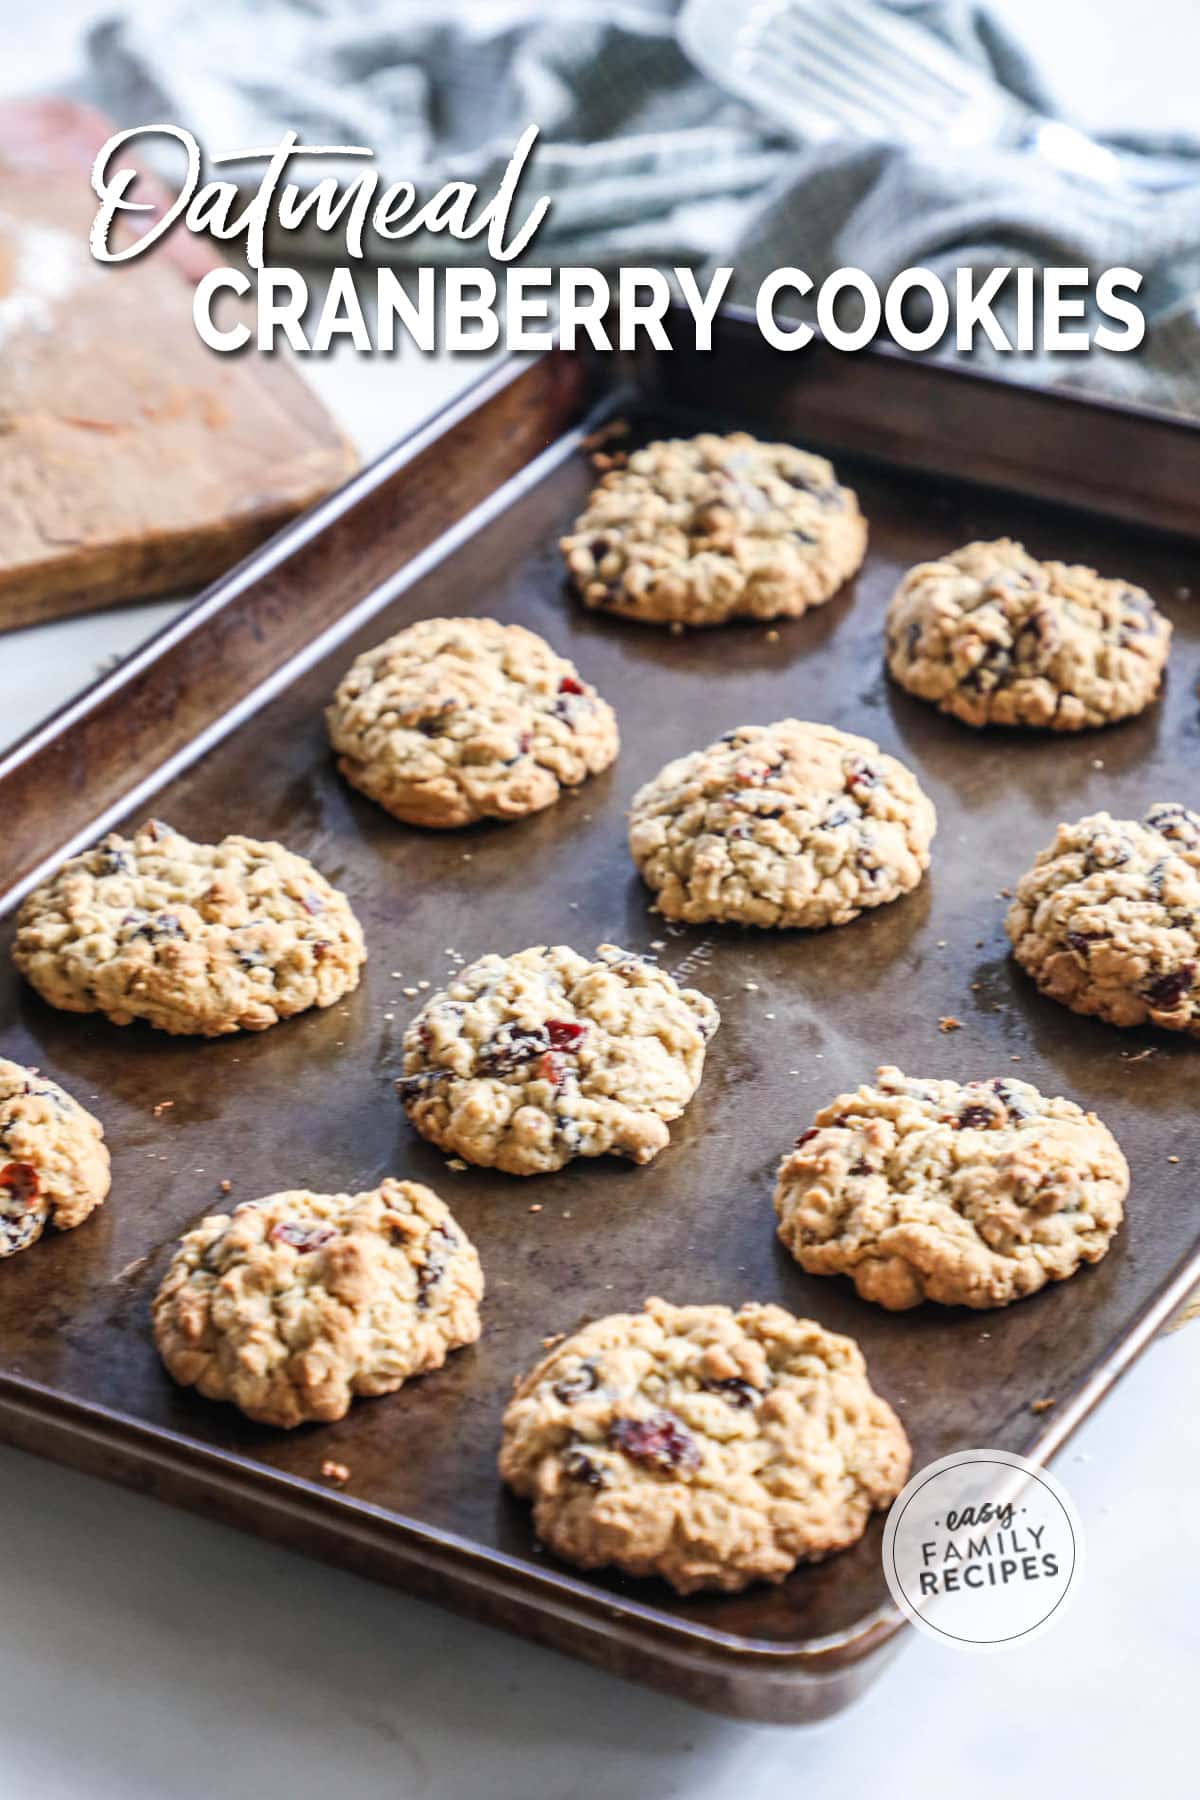 Cranberry oatmeal cookies on a baking tray after being baked.